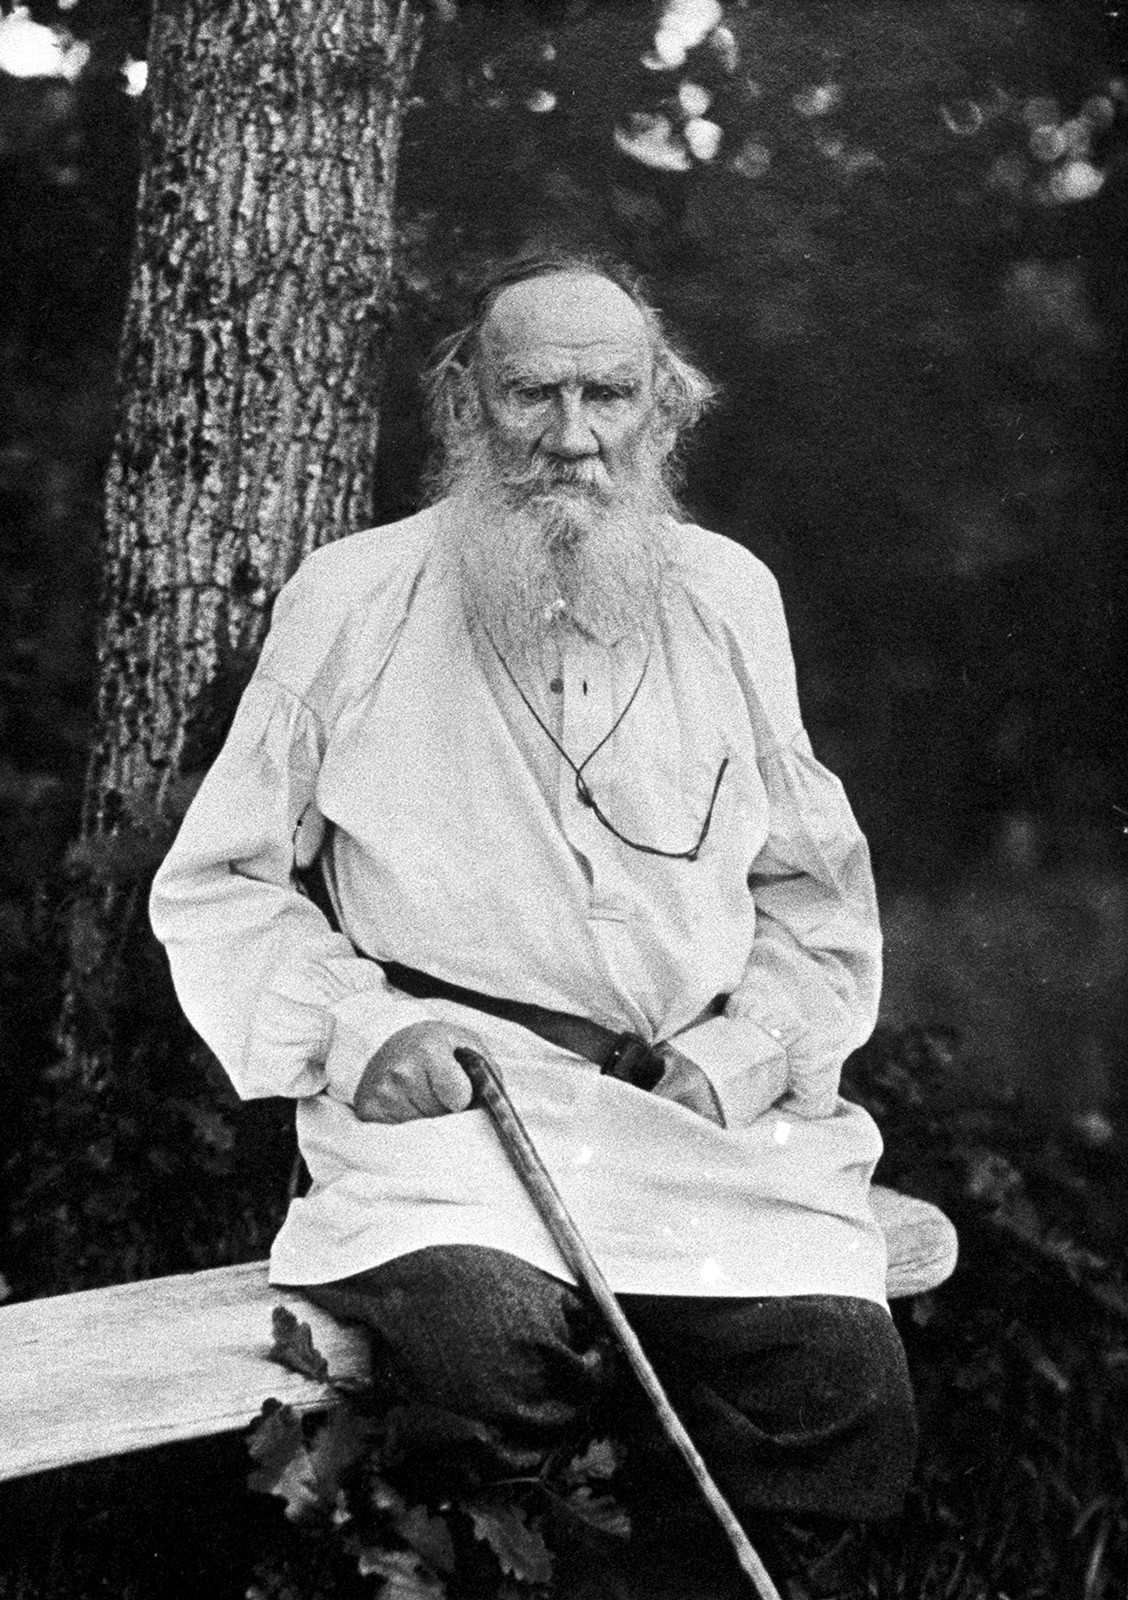 Leo Tolstoy dominated Russia's cultural and social life in the early 20th century.